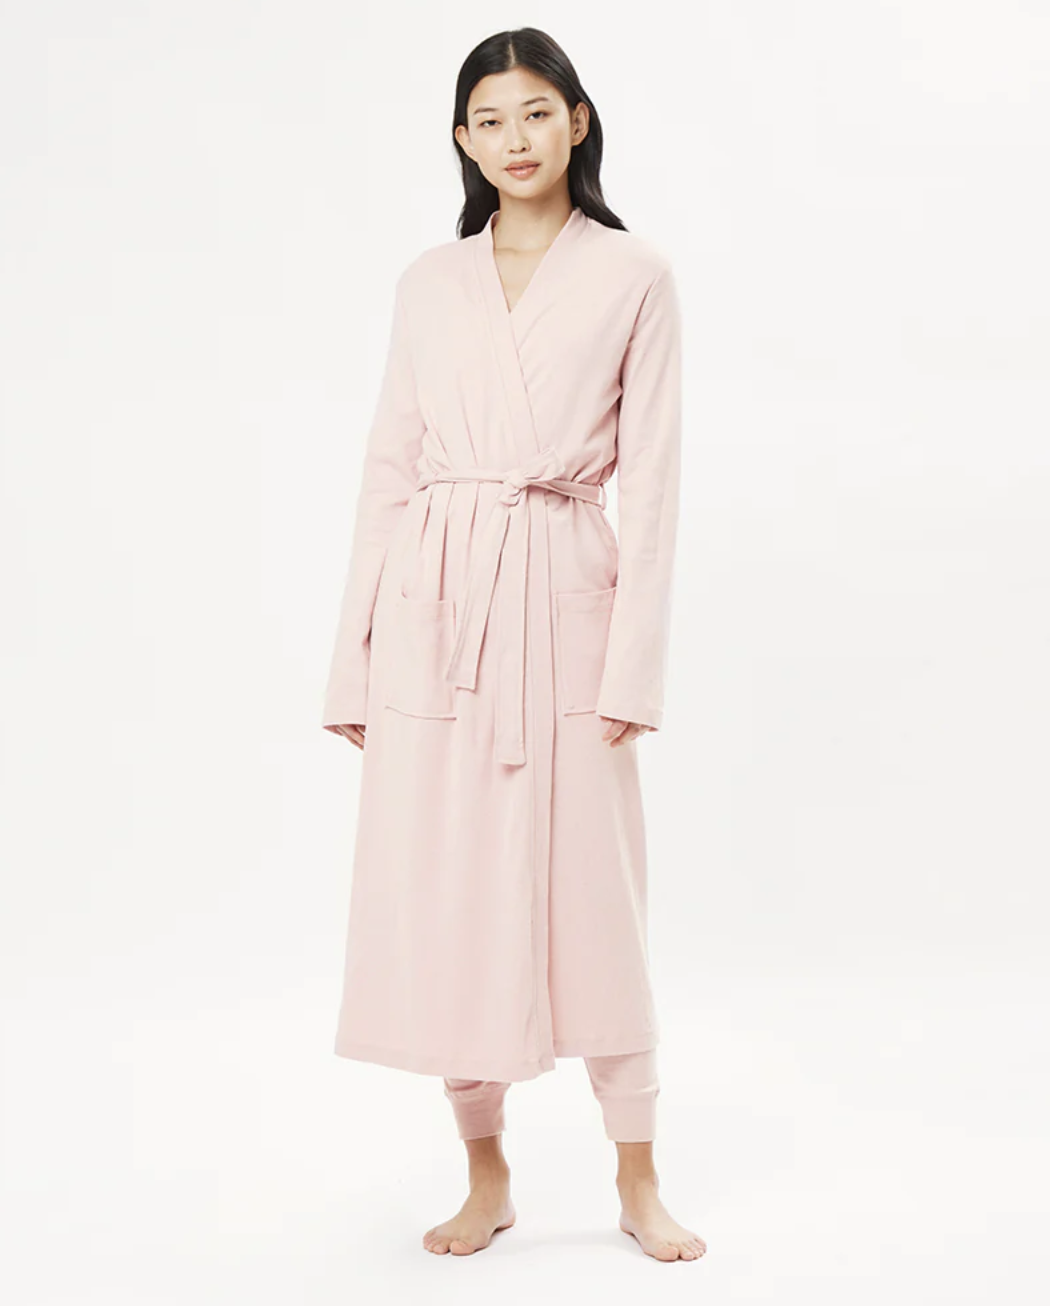 Pink organic cotton robe worn by an Asian model 